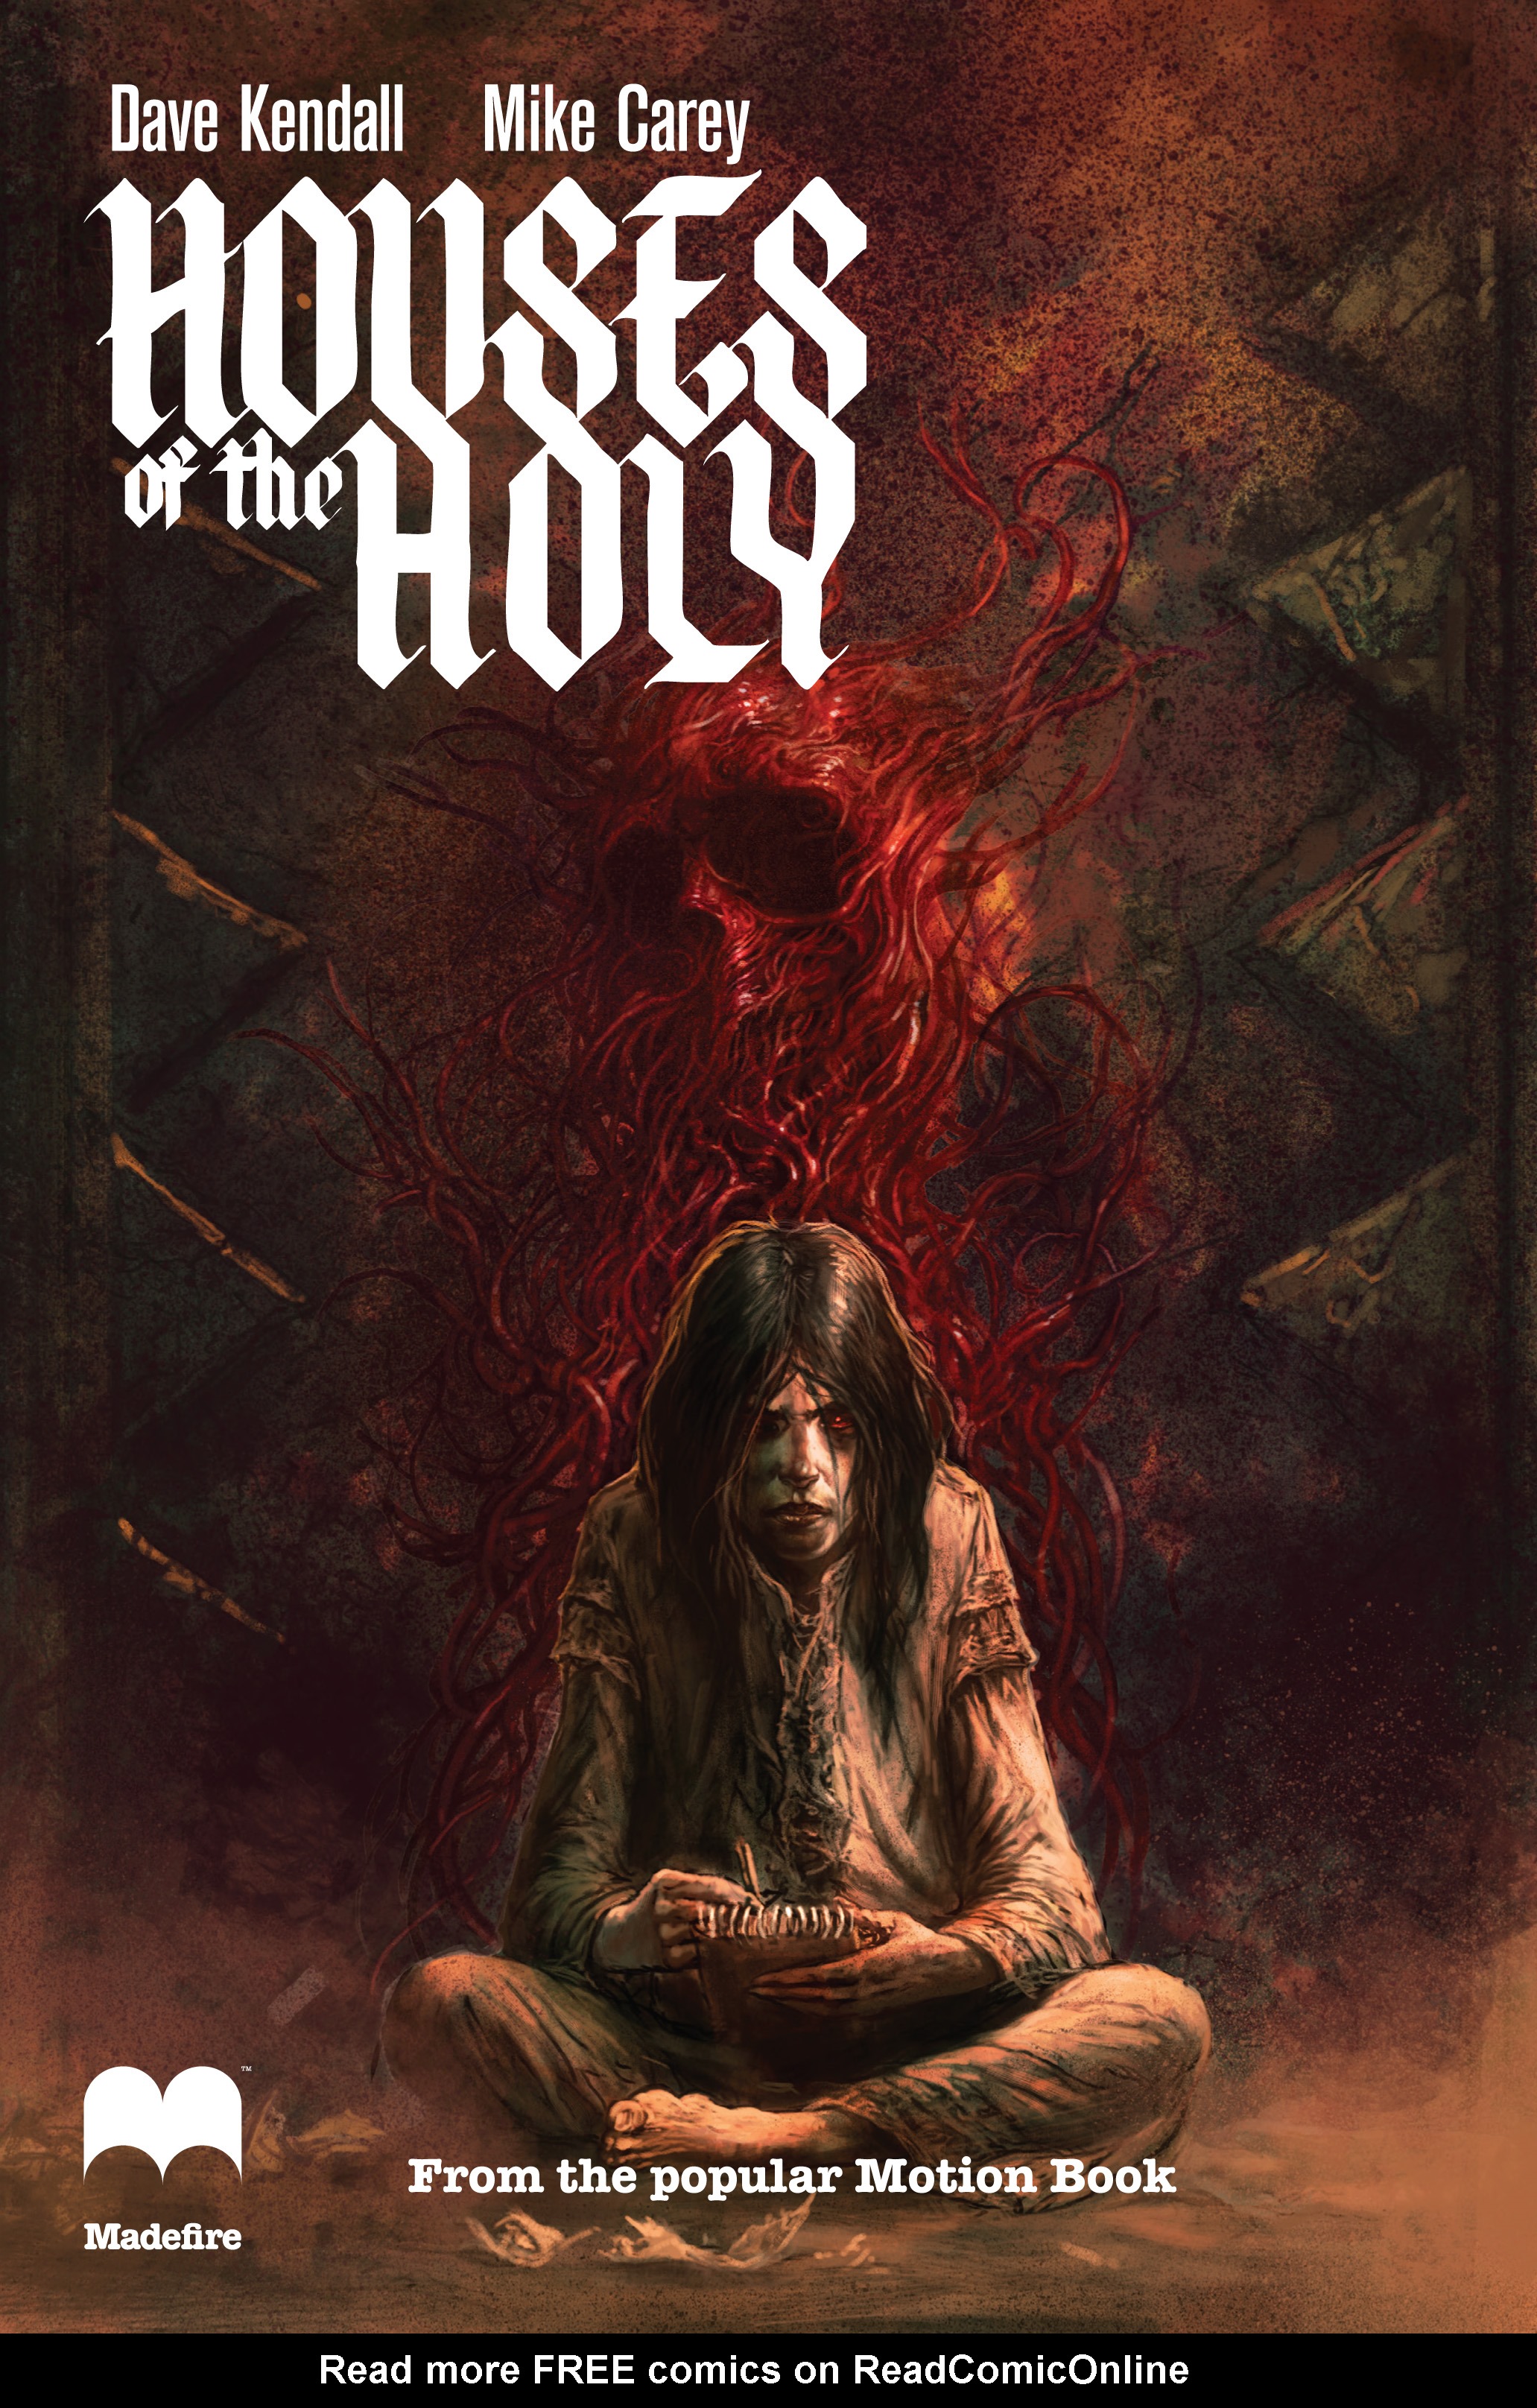 Read online House of the Holy comic -  Issue # Full - 1